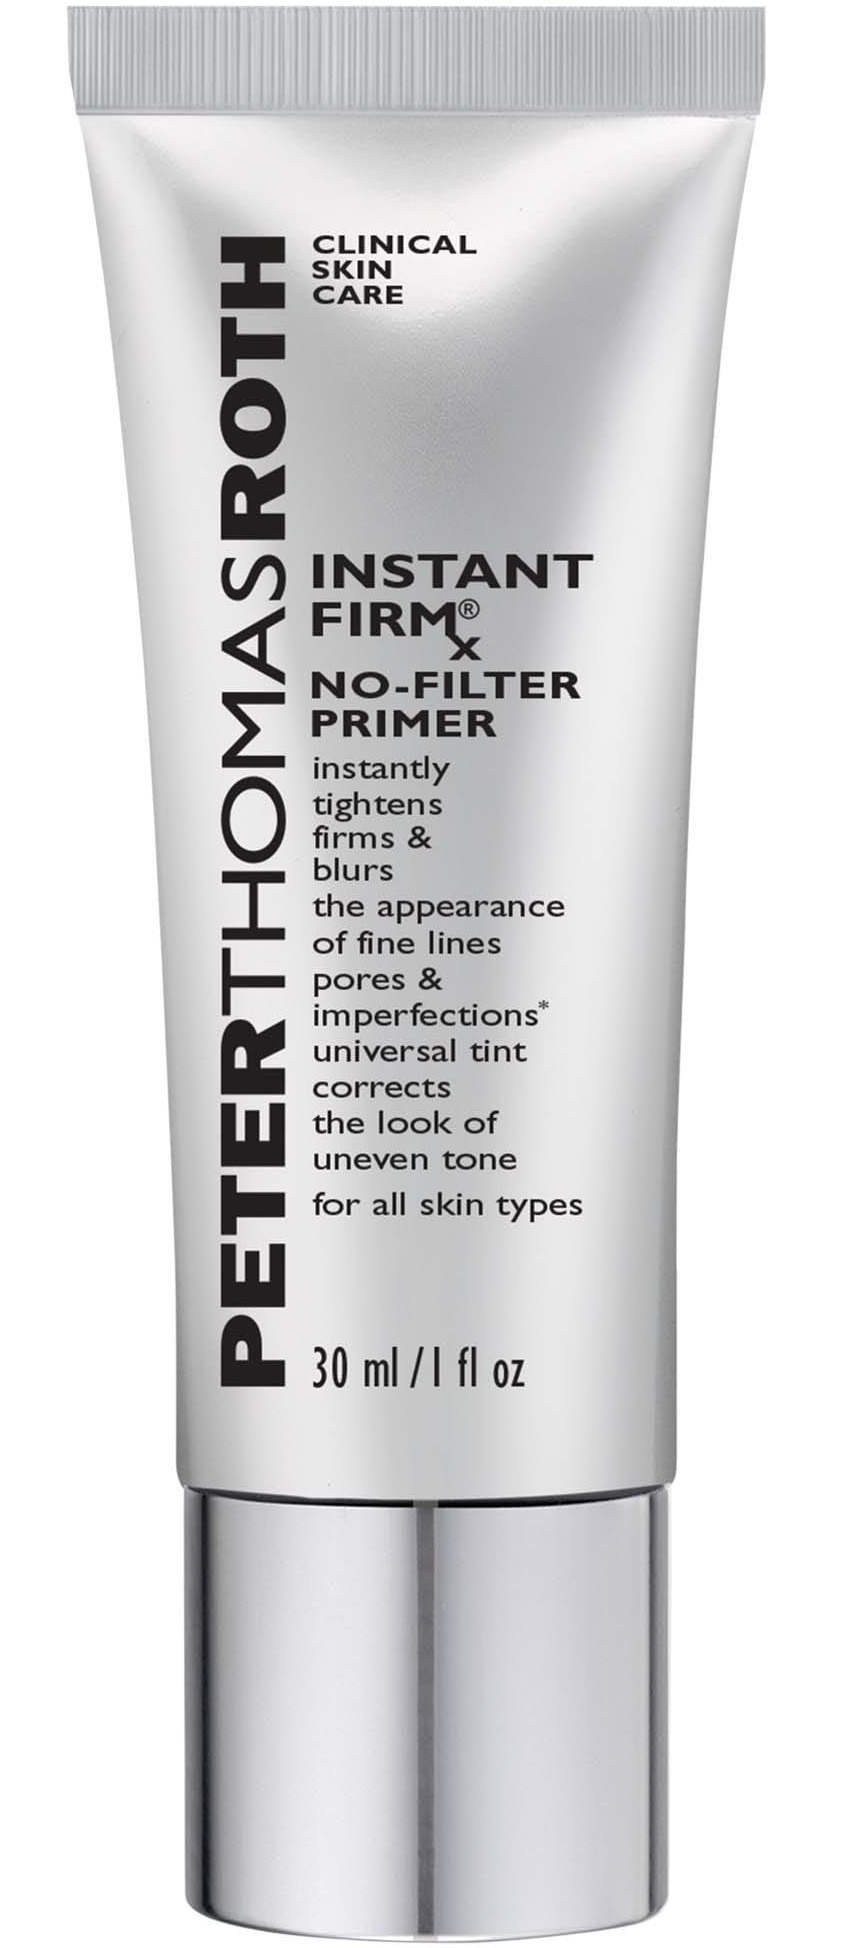 Peter Thomas Roth Instant Firmx No Filter Primer